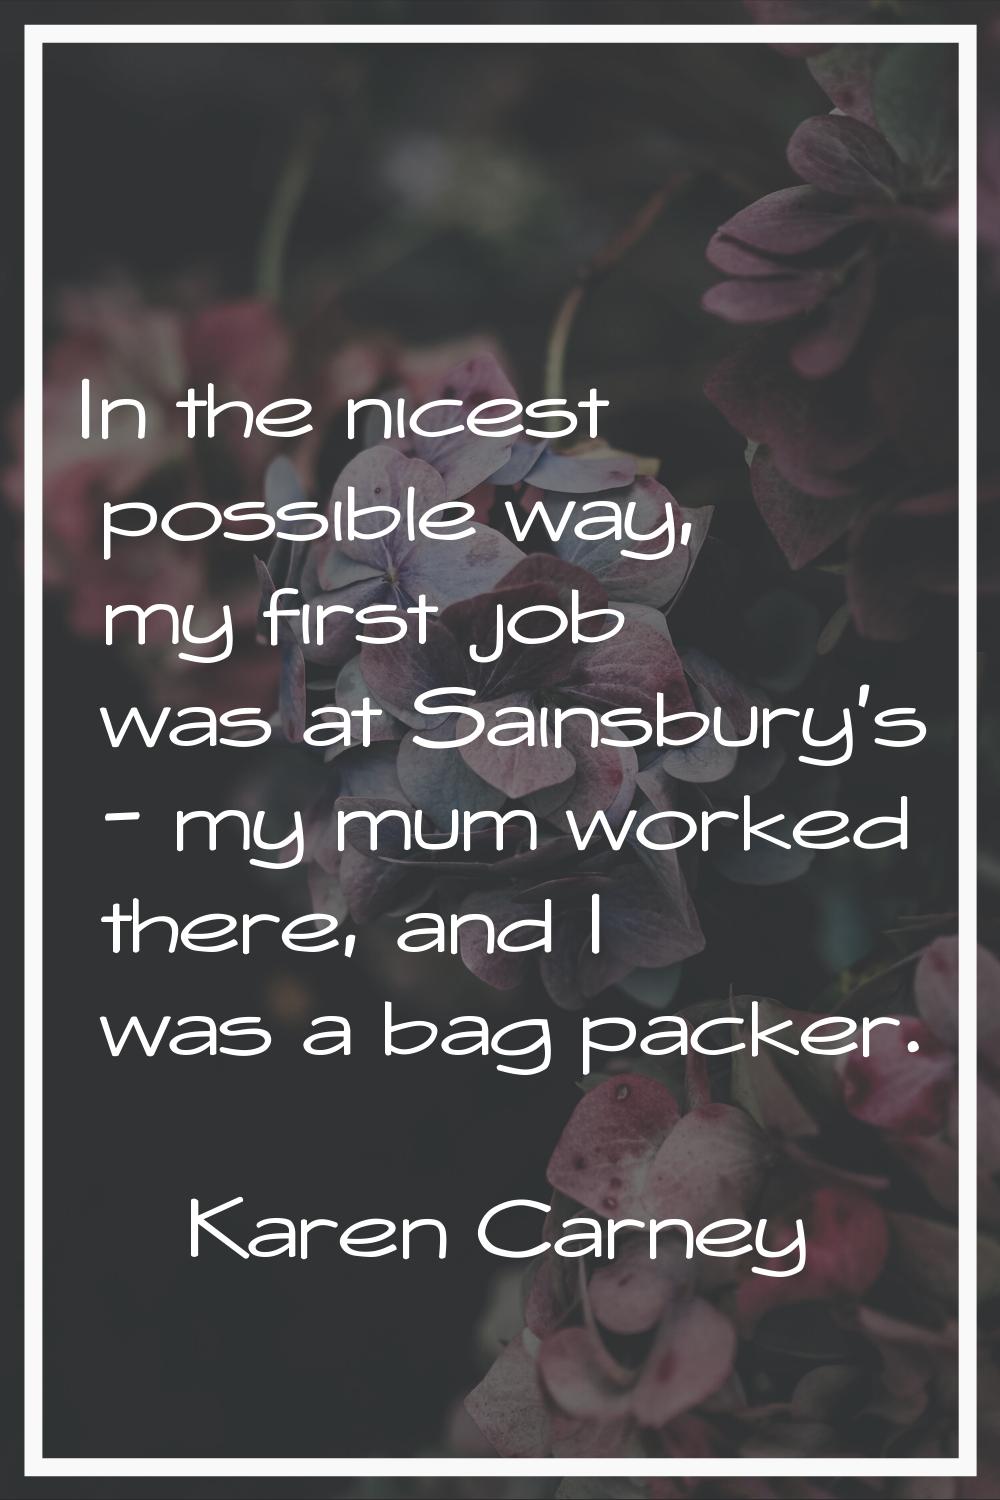 In the nicest possible way, my first job was at Sainsbury's - my mum worked there, and I was a bag 